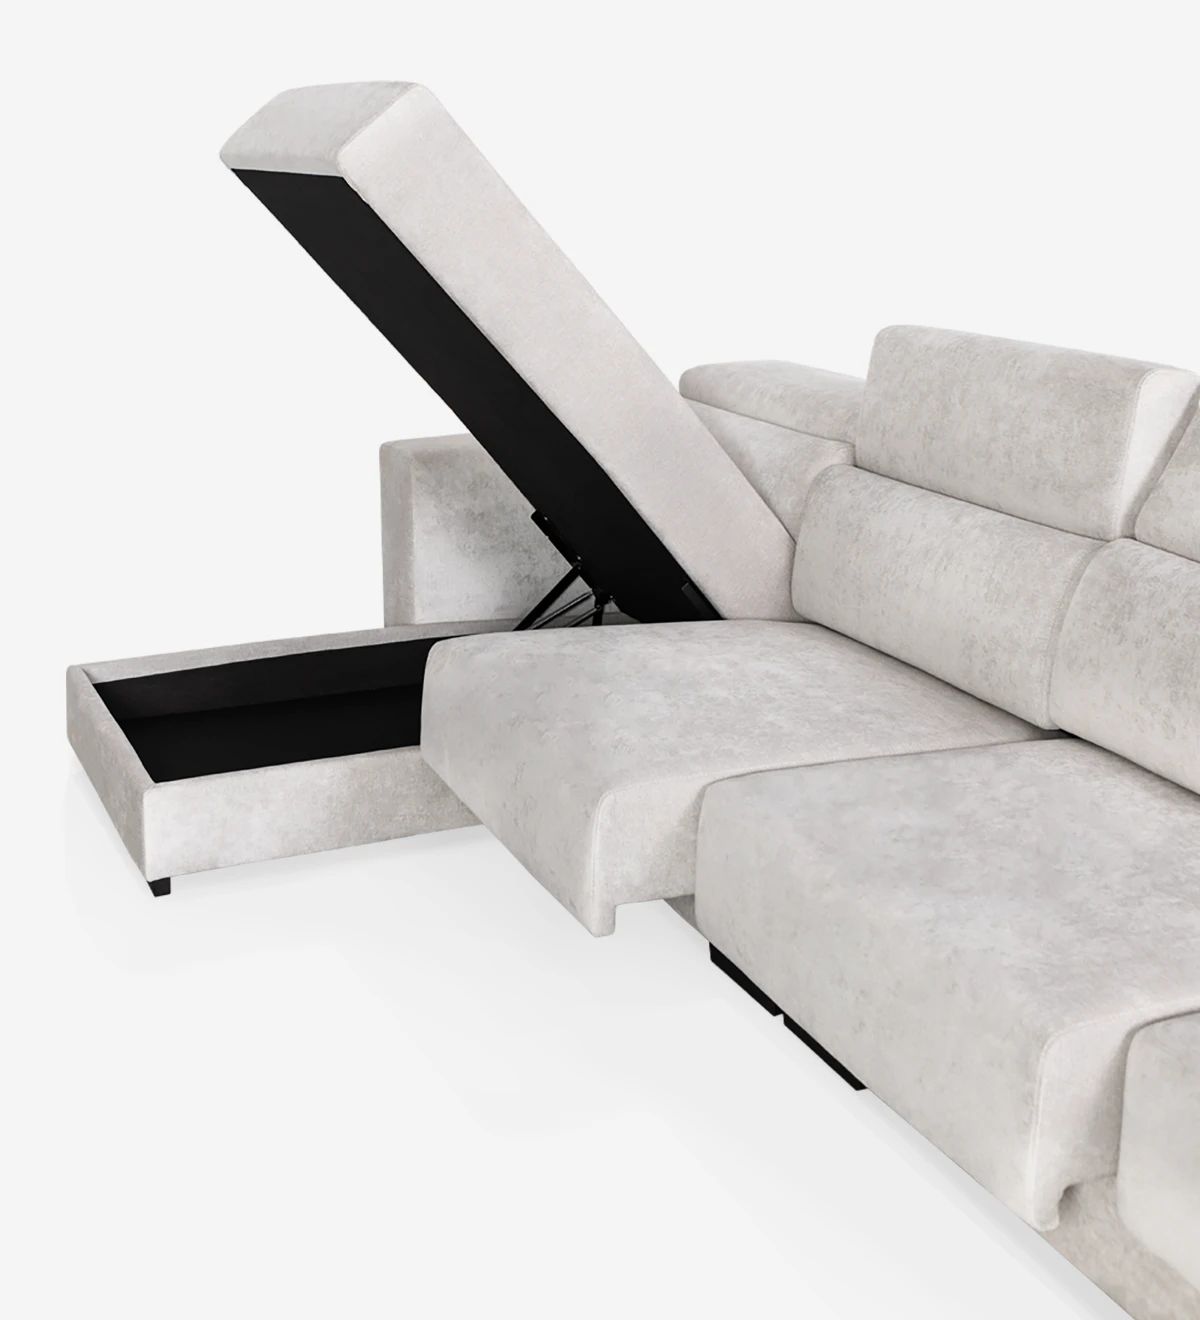 3 seater sofa with chaise longue, upholstered in fabric, with reclining headrests and sliding seats.